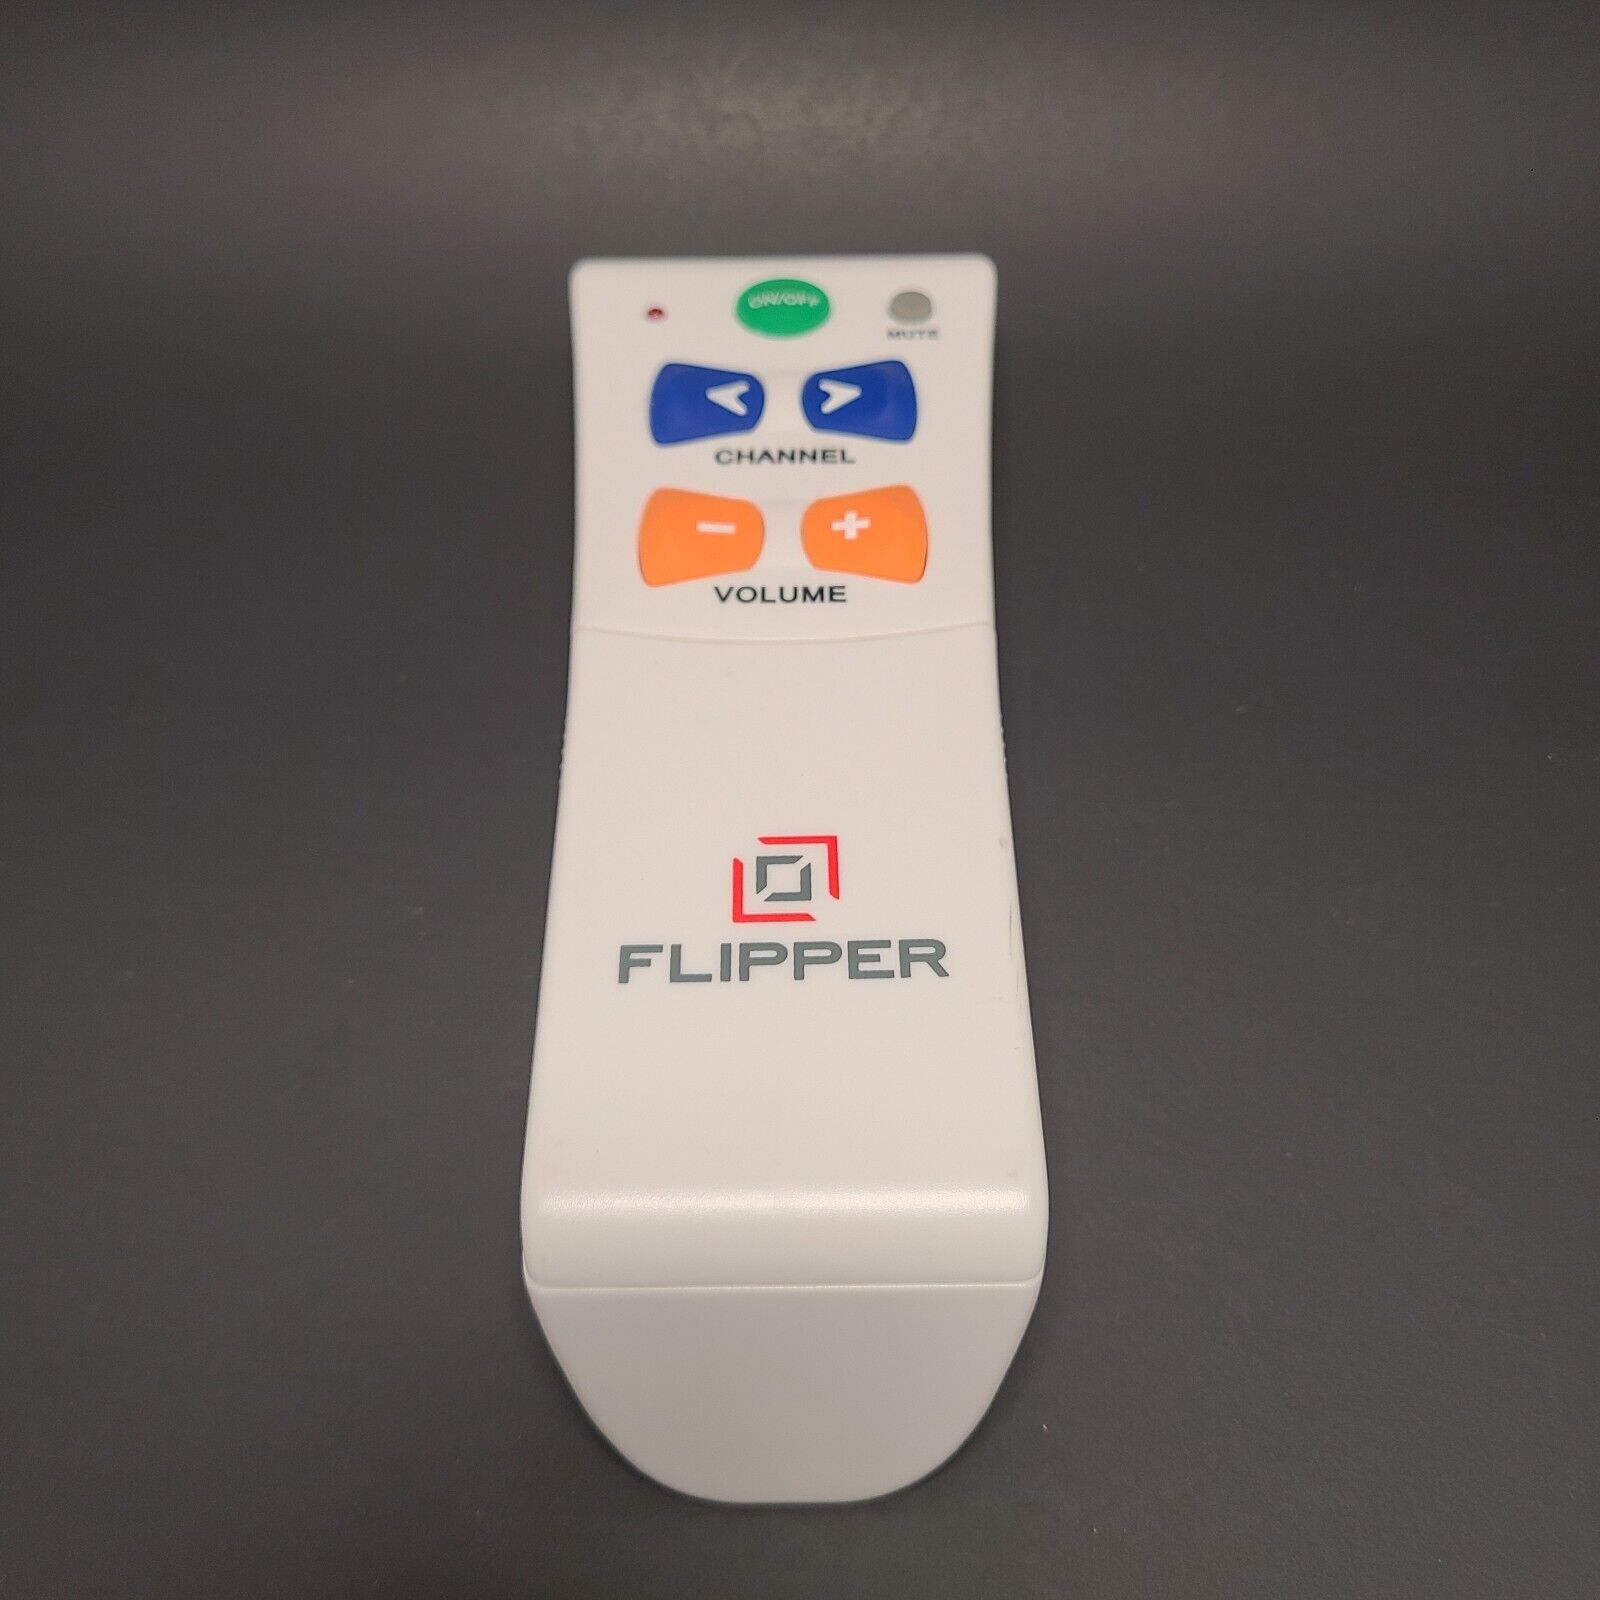 Flipper Simple Big Button Universal Remote Control TESTED WORKS!!